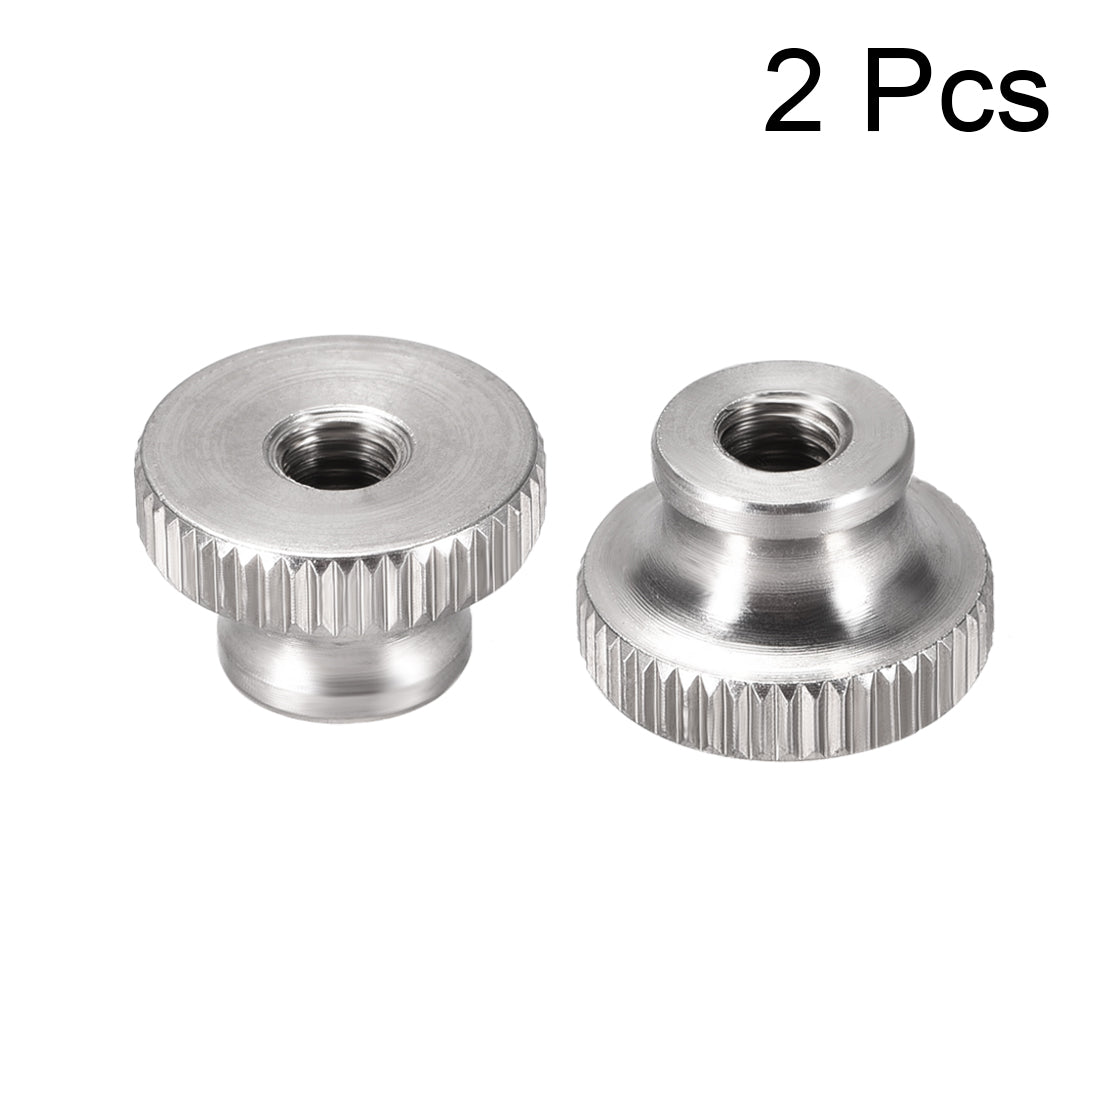 uxcell Uxcell Knurled Thumb Nuts, 2Pcs M5 304 Stainless Steel Round Knobs for 3D Printer Parts